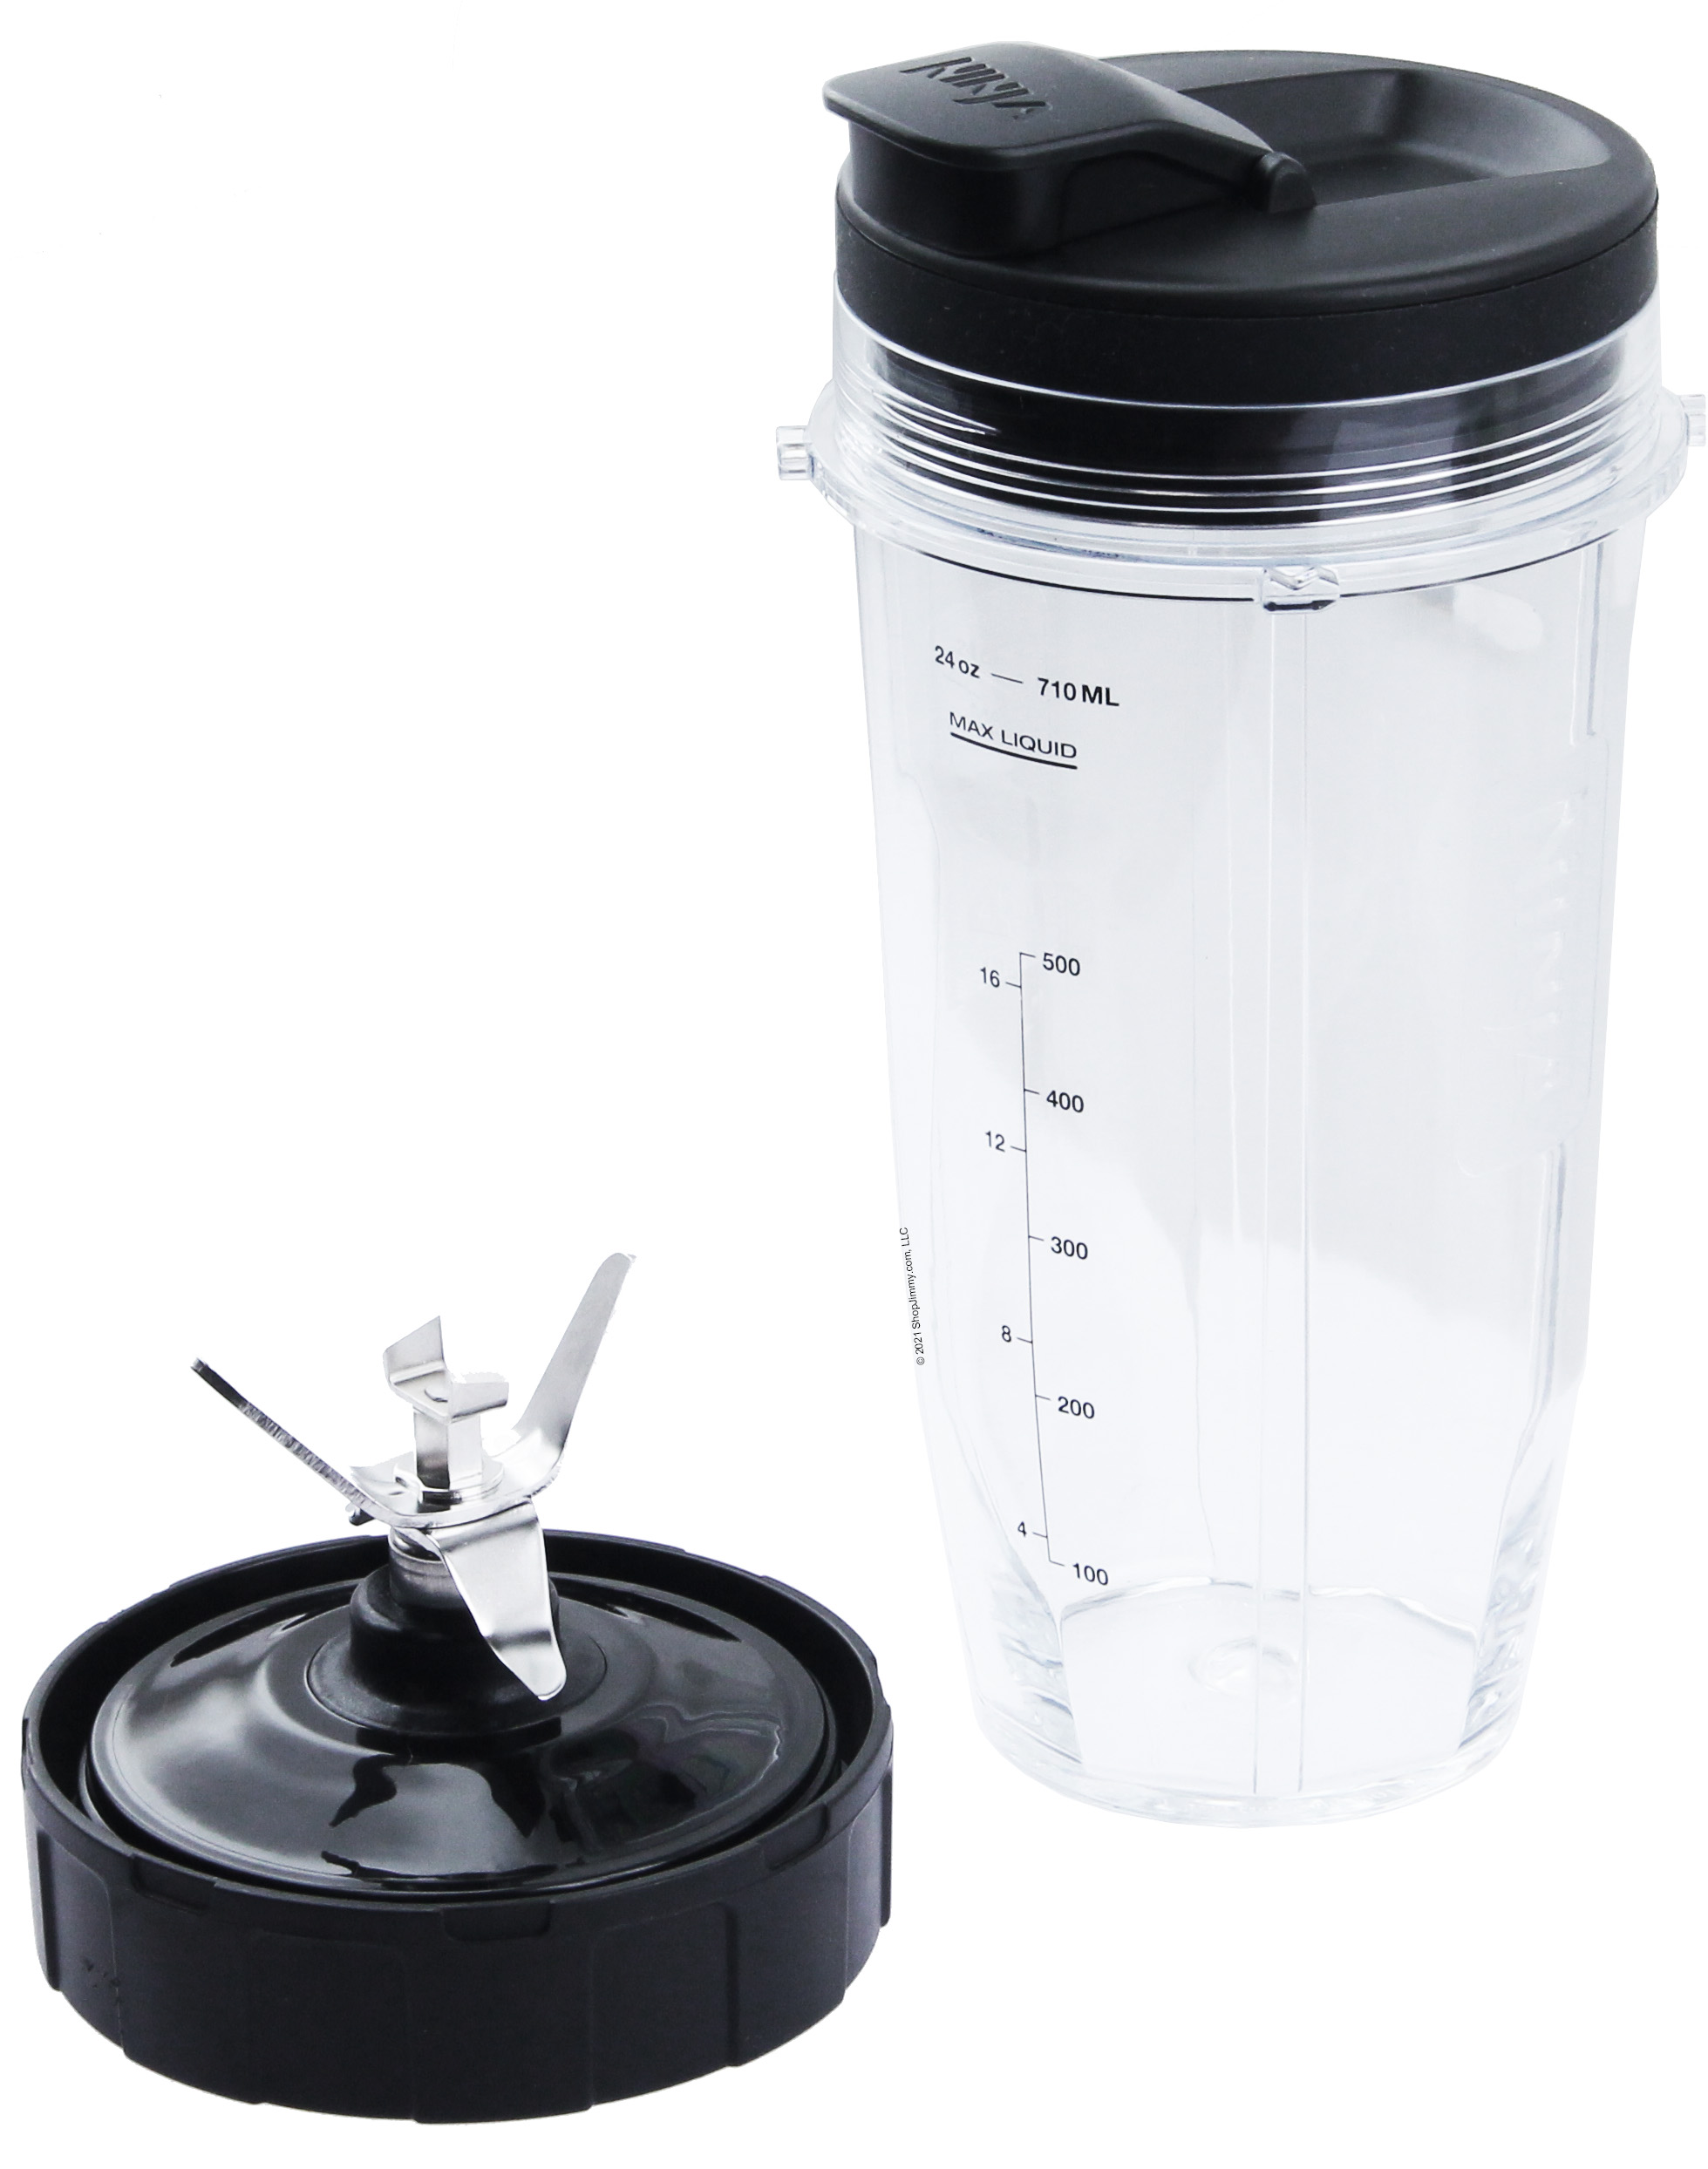 Blender Replacement Parts for Ninja, 2 24Oz Cups with To-Go Lids